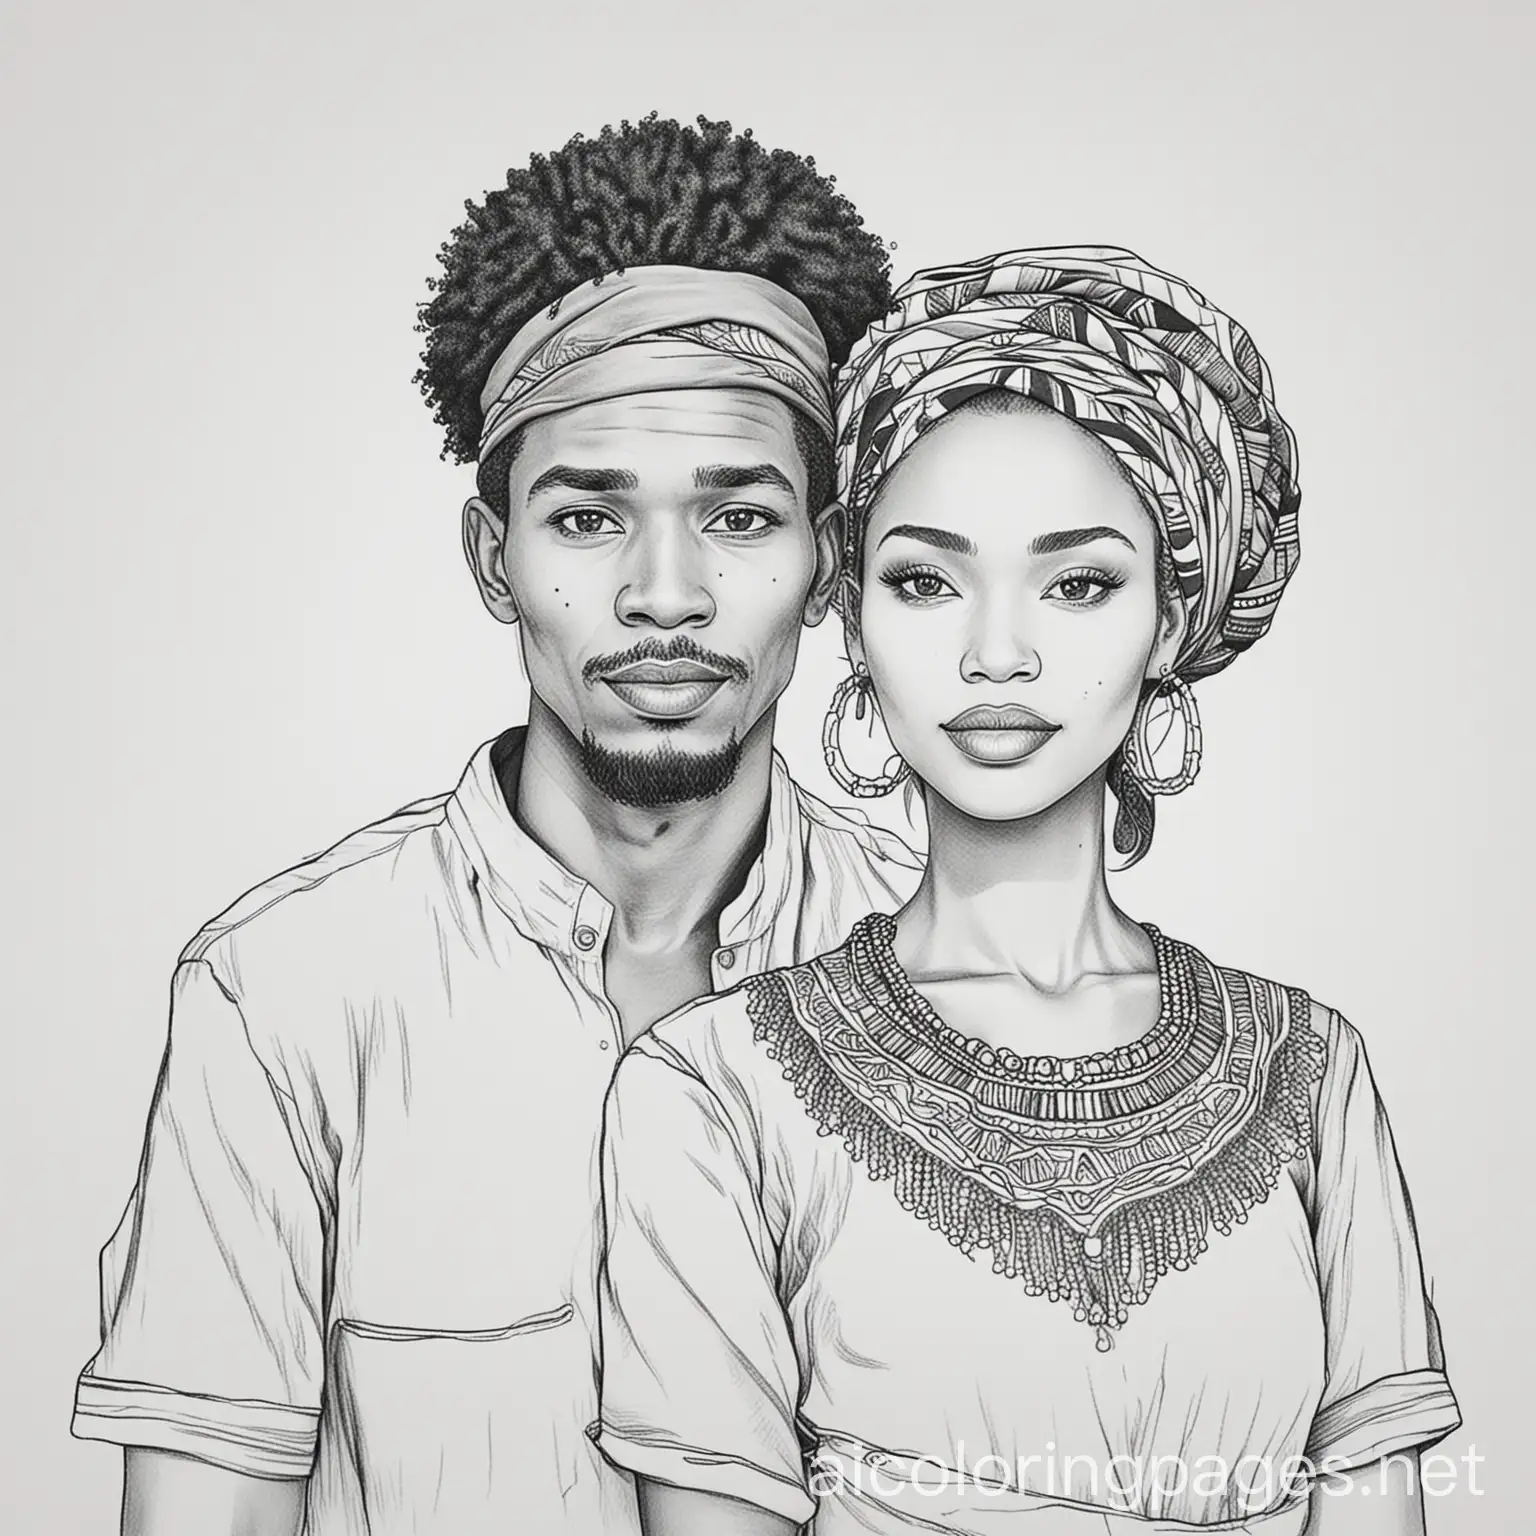 Coloring-Page-Man-and-Woman-in-Botswana-Africa-Black-and-White-Line-Art